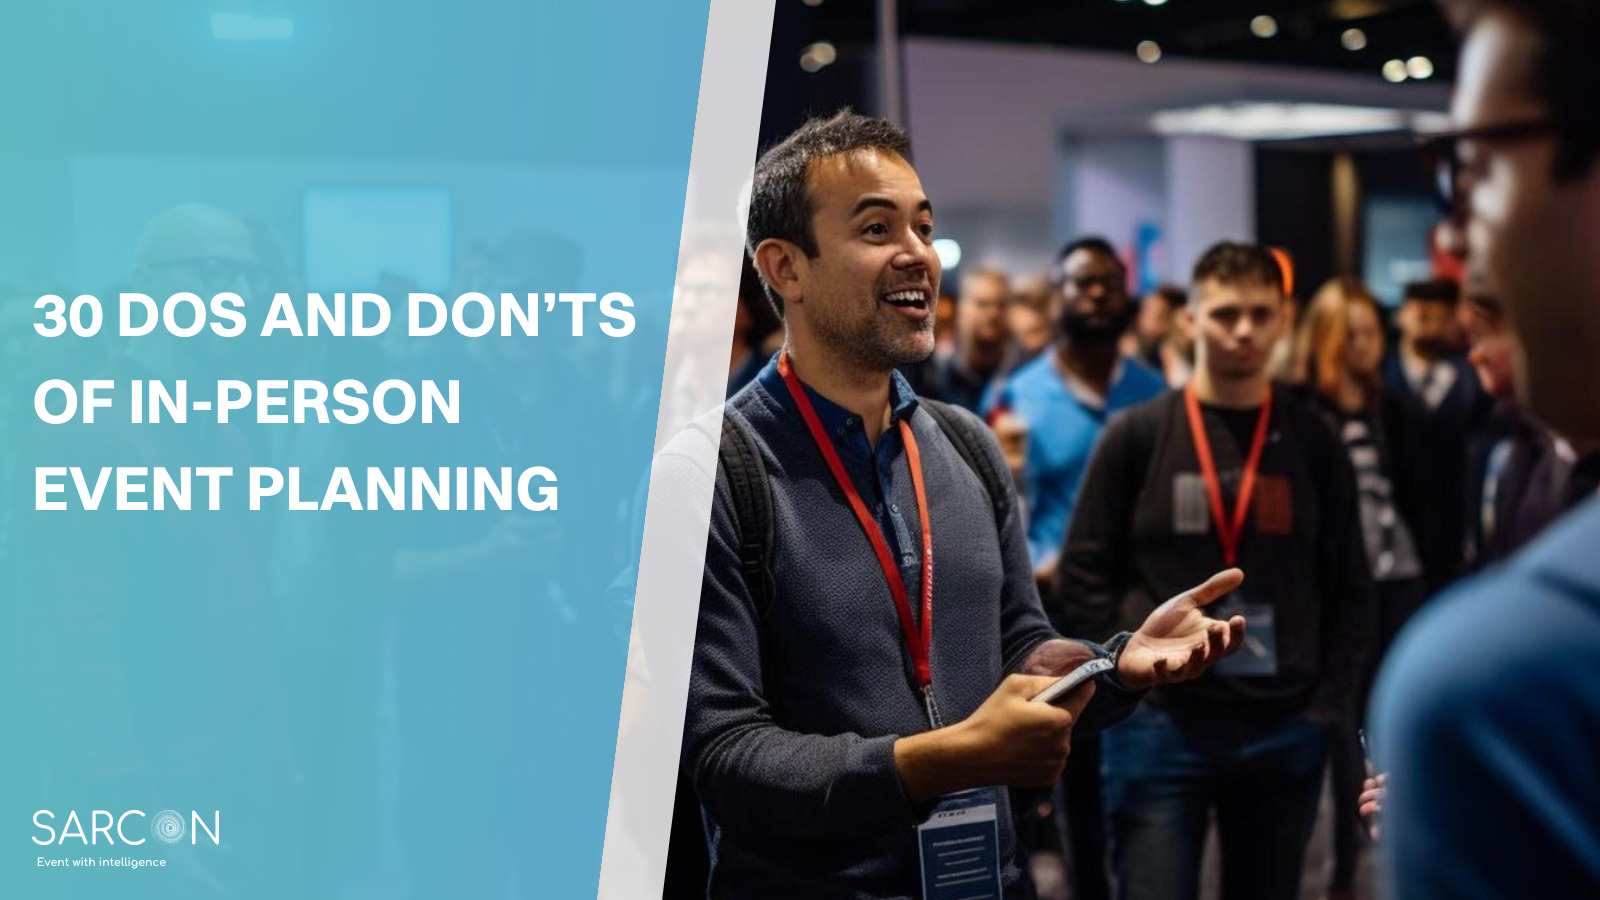 30 Dos and Don’ts of In-Person Event Planning